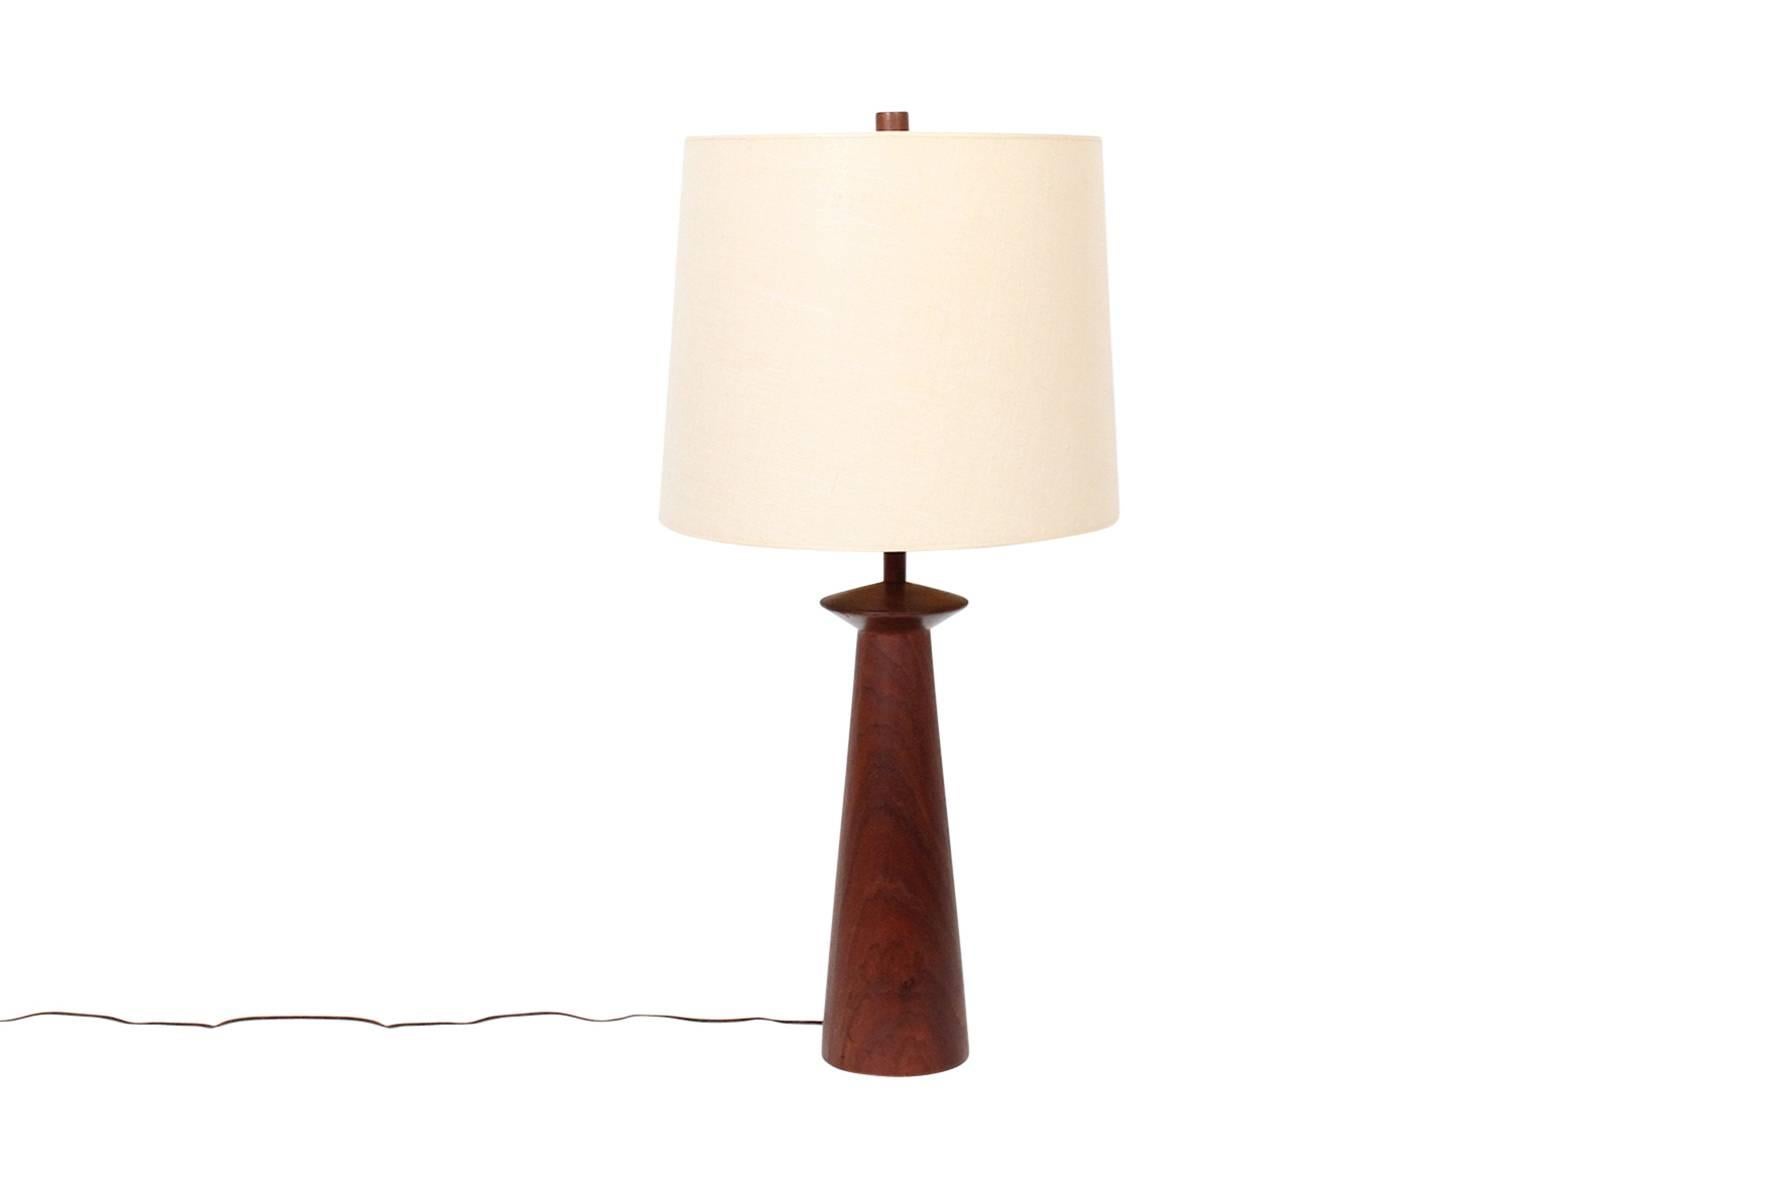 Unique pair of table lamps in walnut designed by Jane and Gordon Martz for Marshall Studios. This is lamp model "W7". Lamps include the Martz's iconic wooden finials. Dimensions below are for lamp with shade shown. Lamp body dimensions: H: